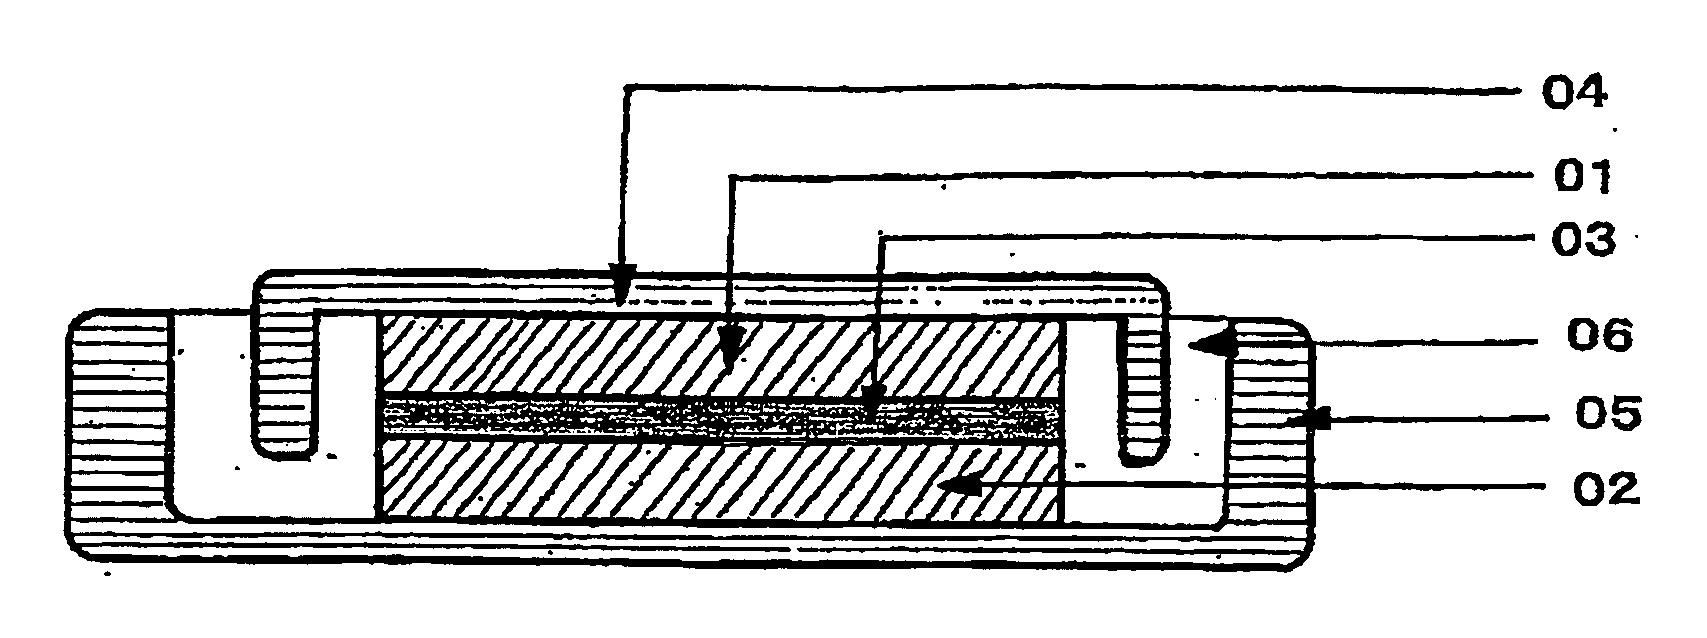 Electrode composite body, electrolyte, and redox capacitor